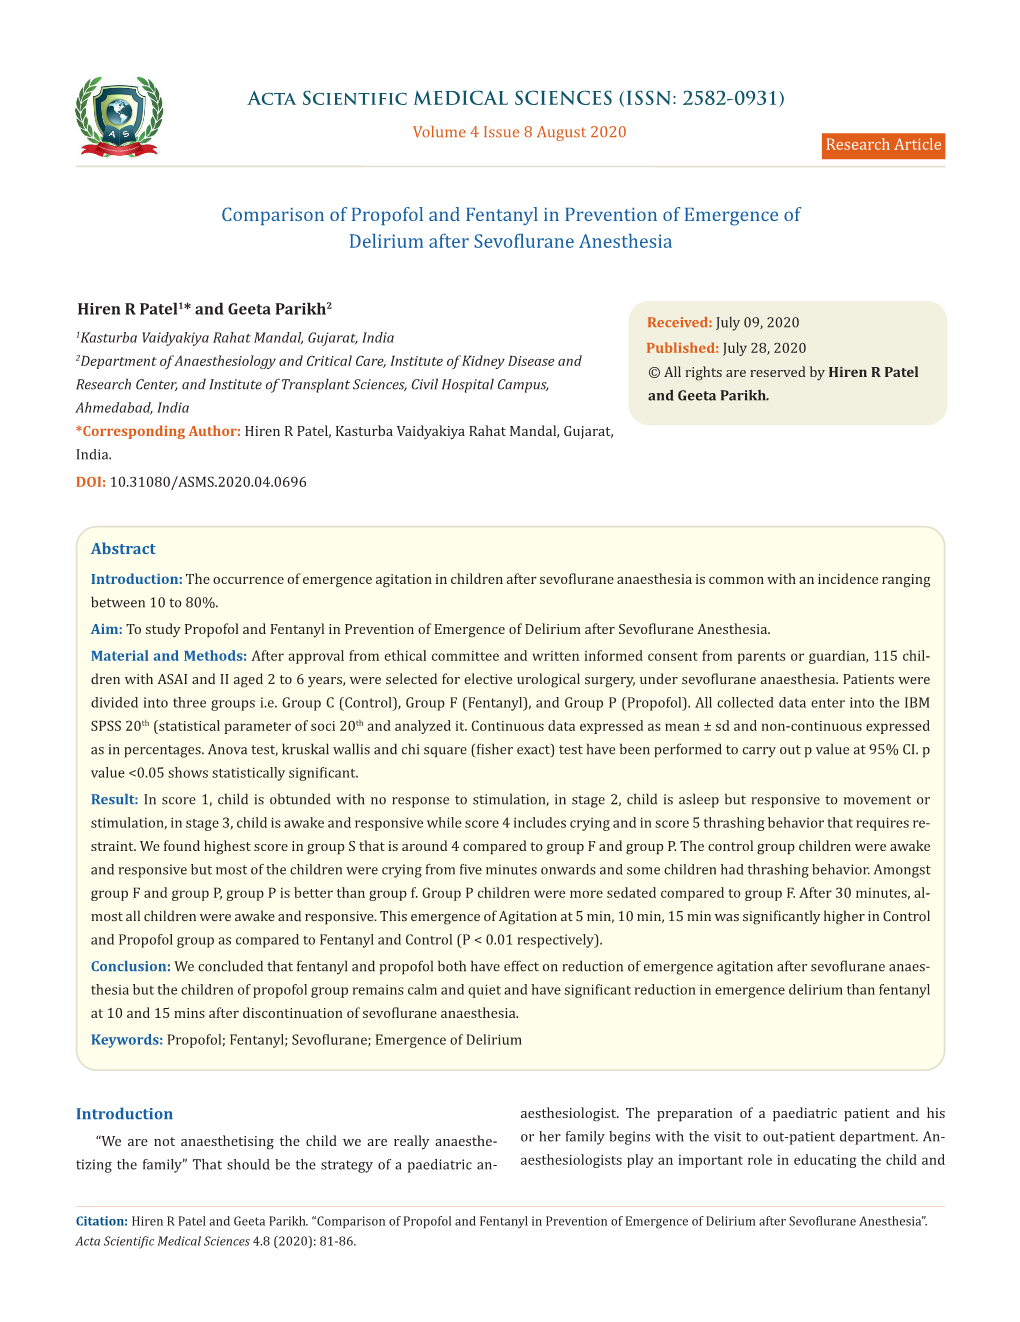 Comparison of Propofol and Fentanyl in Prevention of Emergence Of